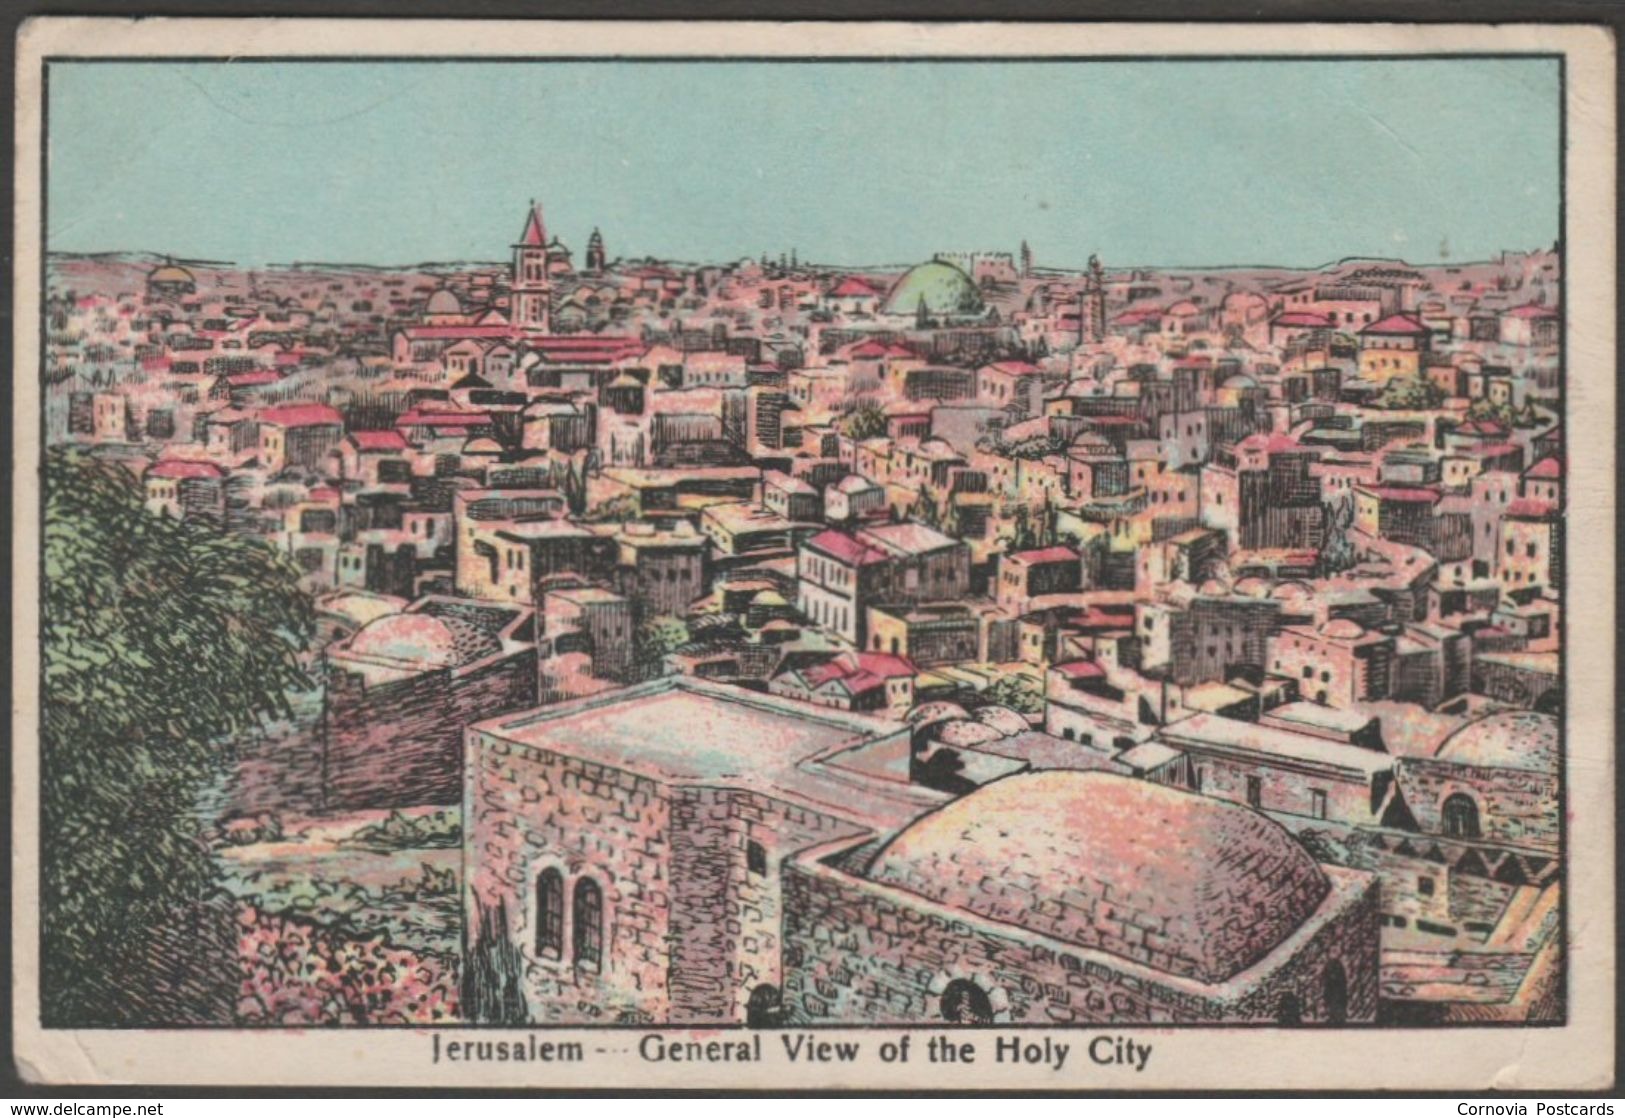 General View Of The Holy City, Jerusalem, 1945 - MW Postcard - Field Post Office - Palestine